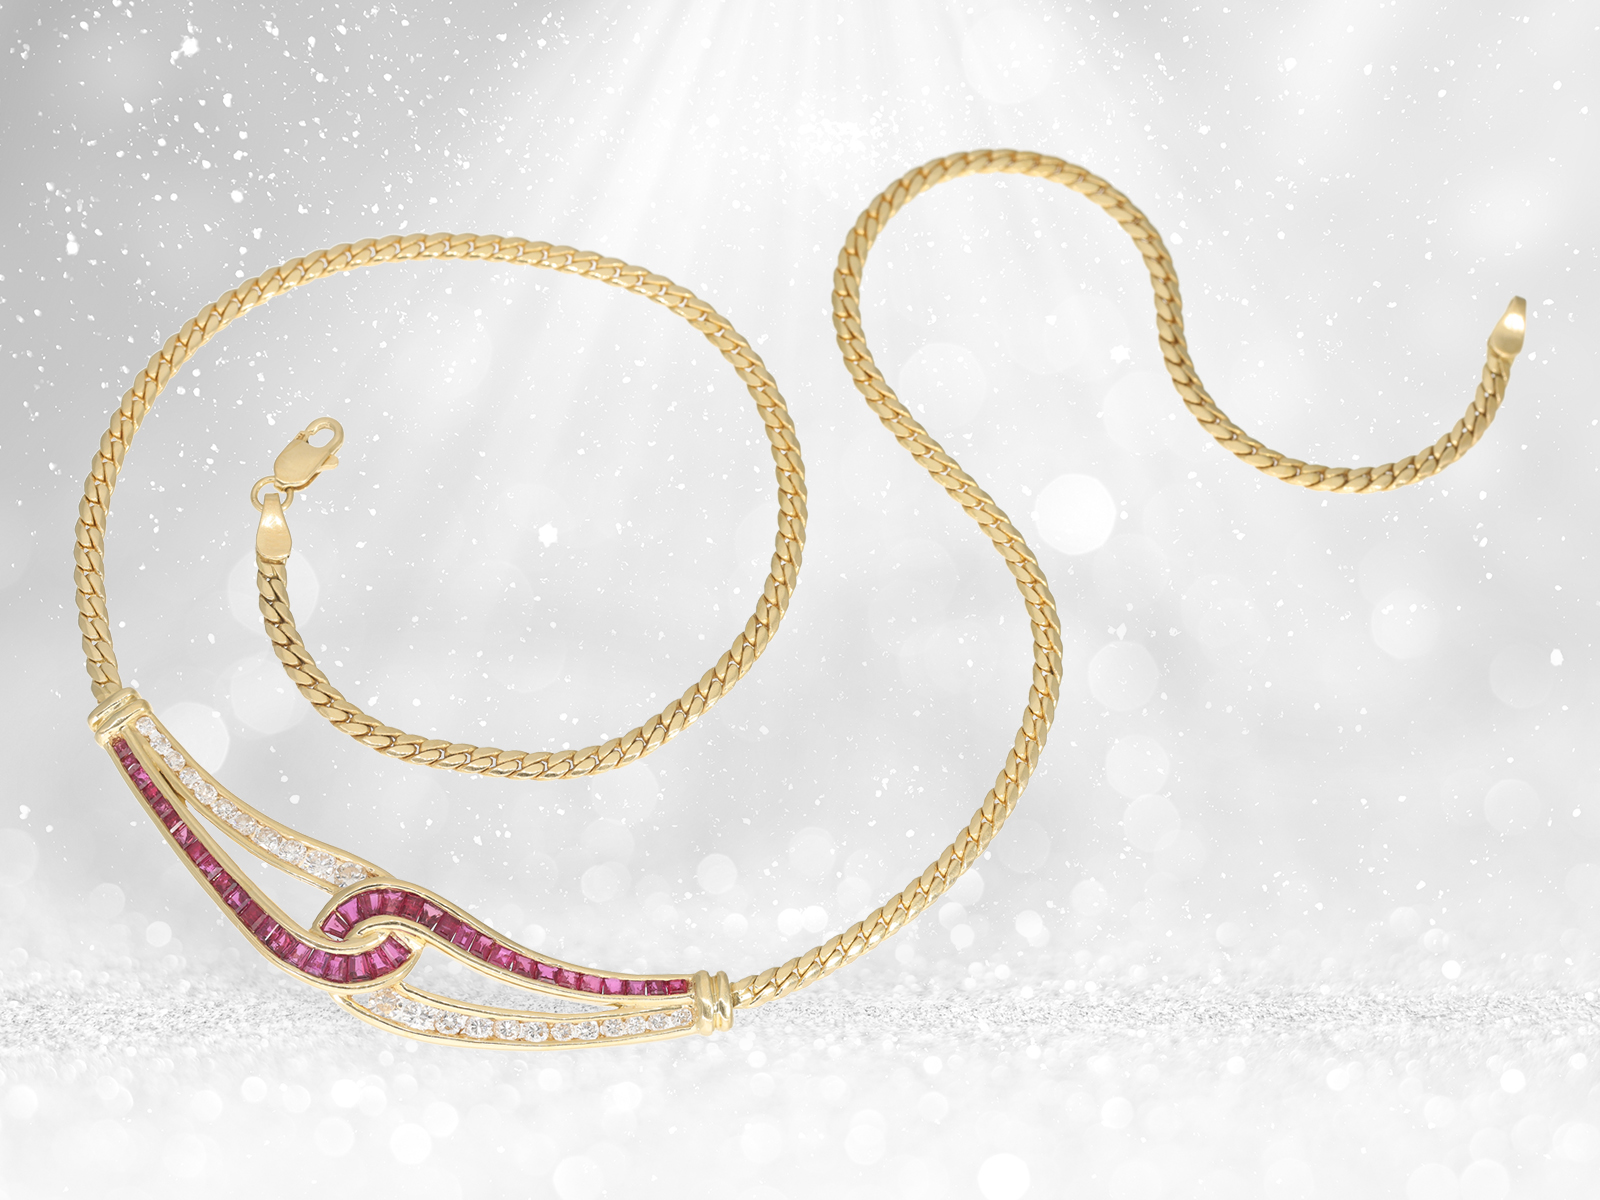 Necklace: high-quality vintage brand jewellery by Bucherer, finest rubies and brilliant-cut diamonds